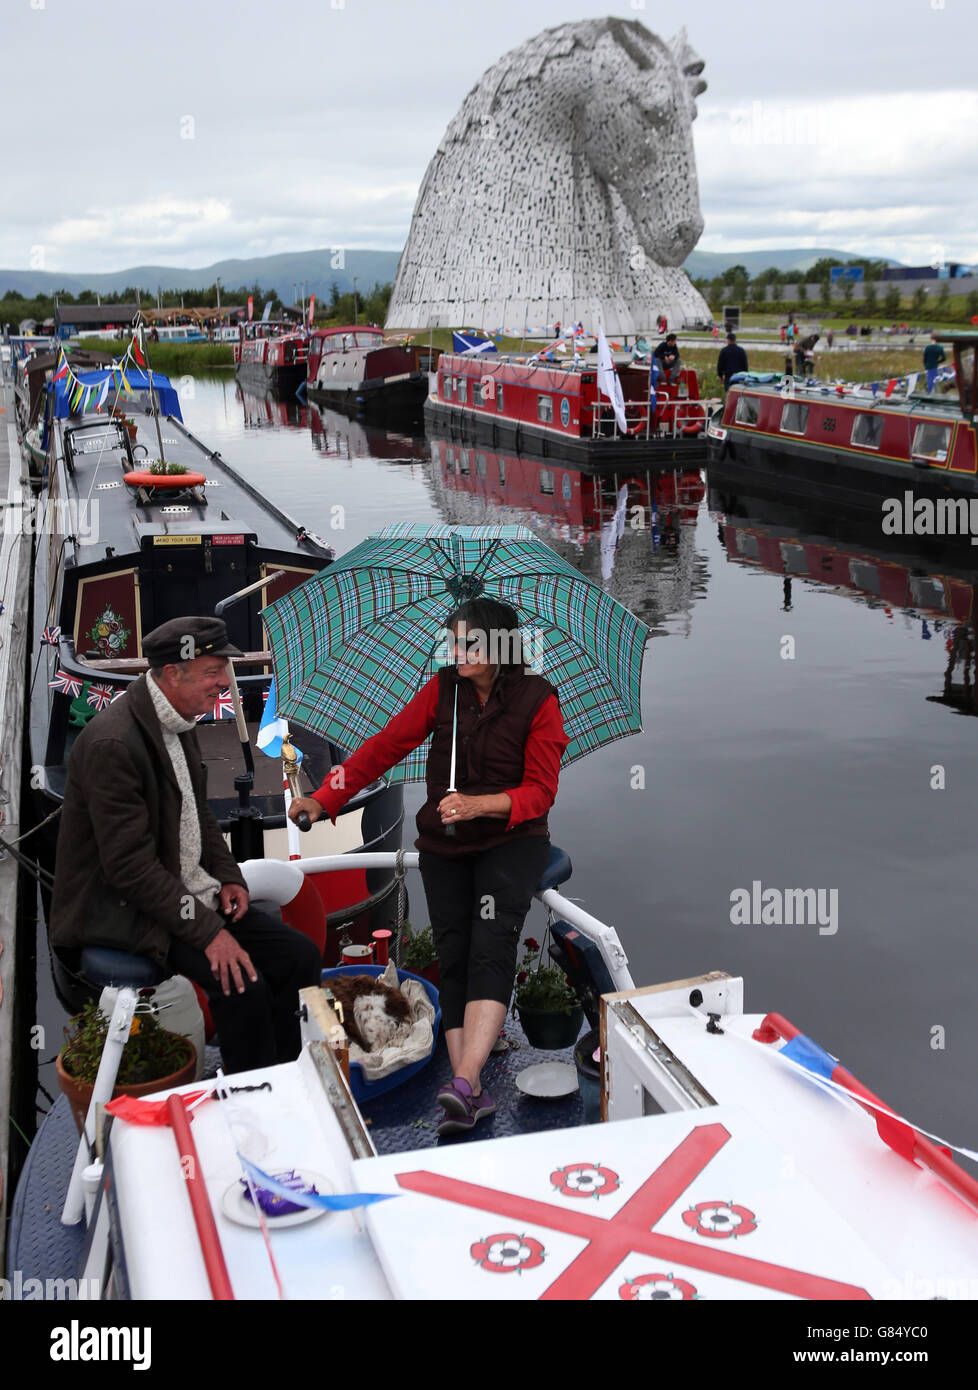 Boaters Dougie and Bernadette MacFarlane on their barge Pendle in front of The Kelpies on the Forth and Clyde Canal after the visitor attraction was officially opened by the Princess Royal. Stock Photo